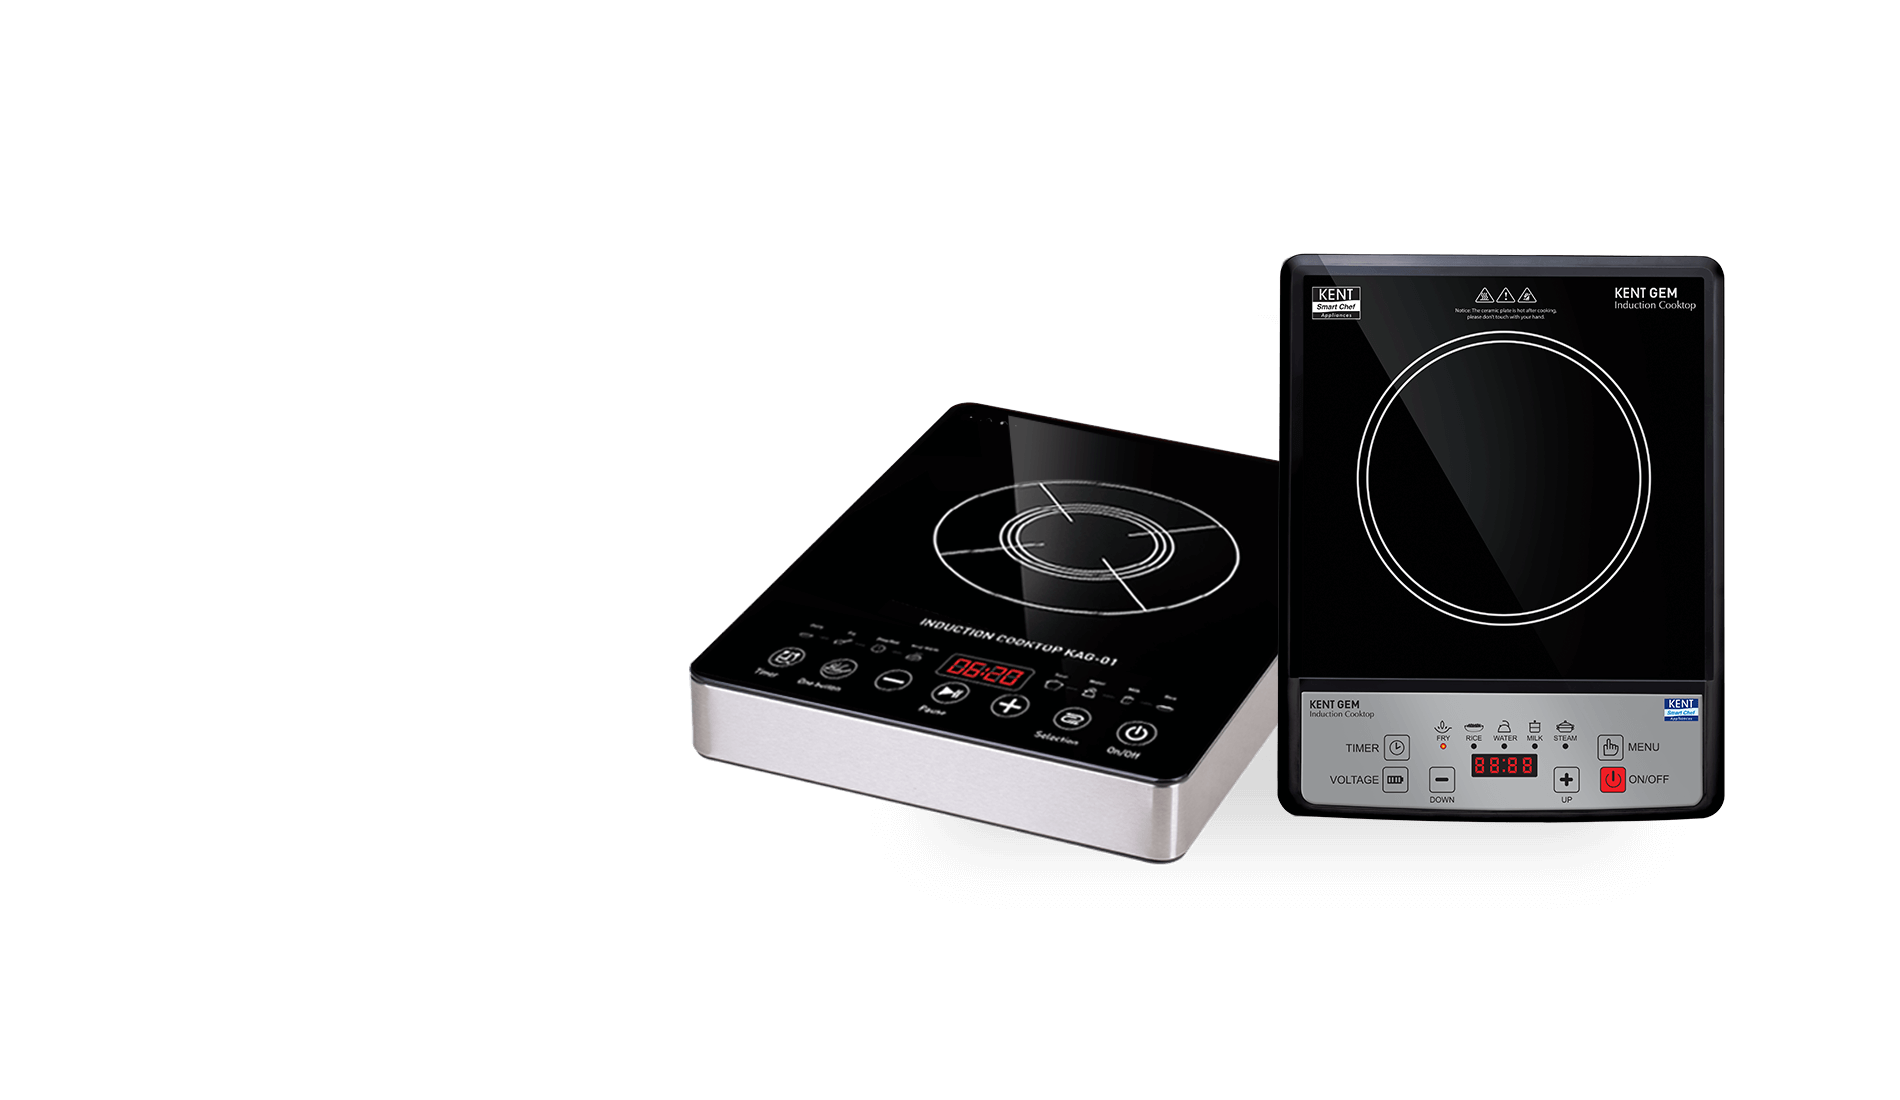 Why Are New Induction Cooktops Safer and Faster Than Gas or Electric? - New York Magazine